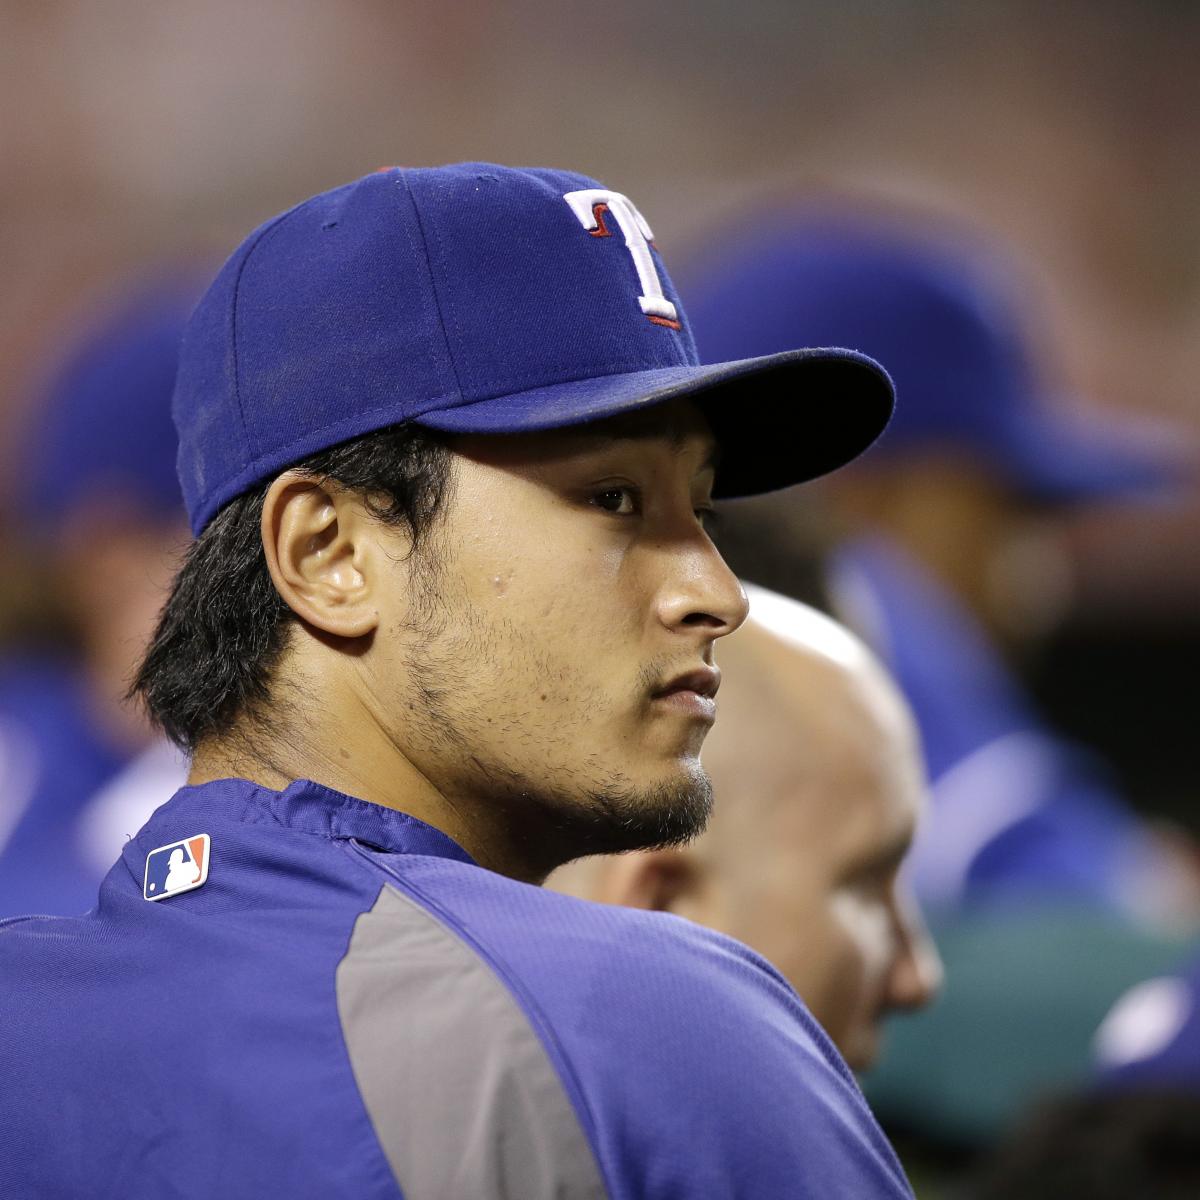 Texas Rangers Pitchers Could Benefit from New Protective Caps This Year